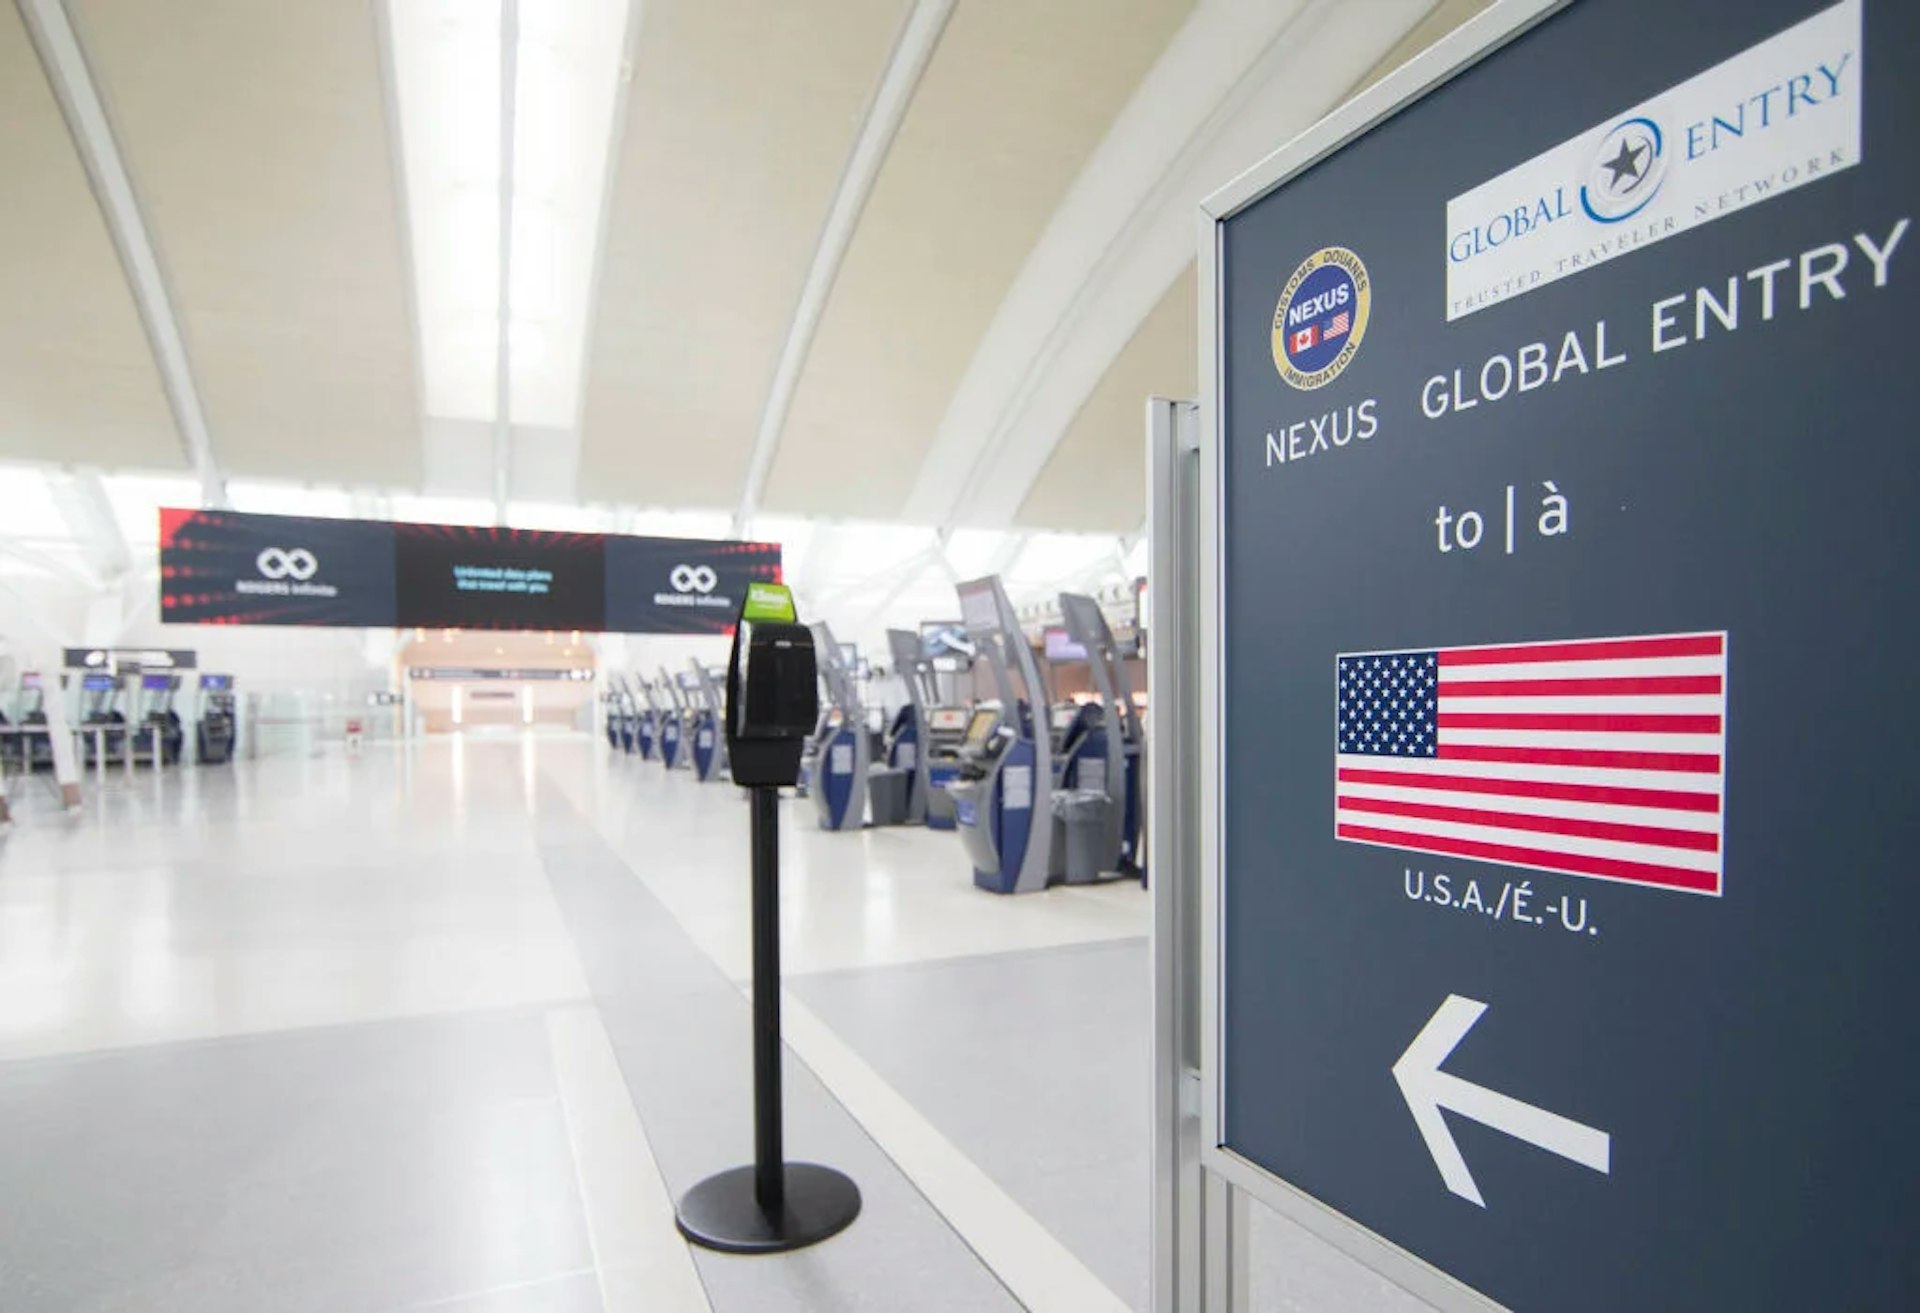 The NEXUS / Global Entry lane at Pearson International Airport in Toronto